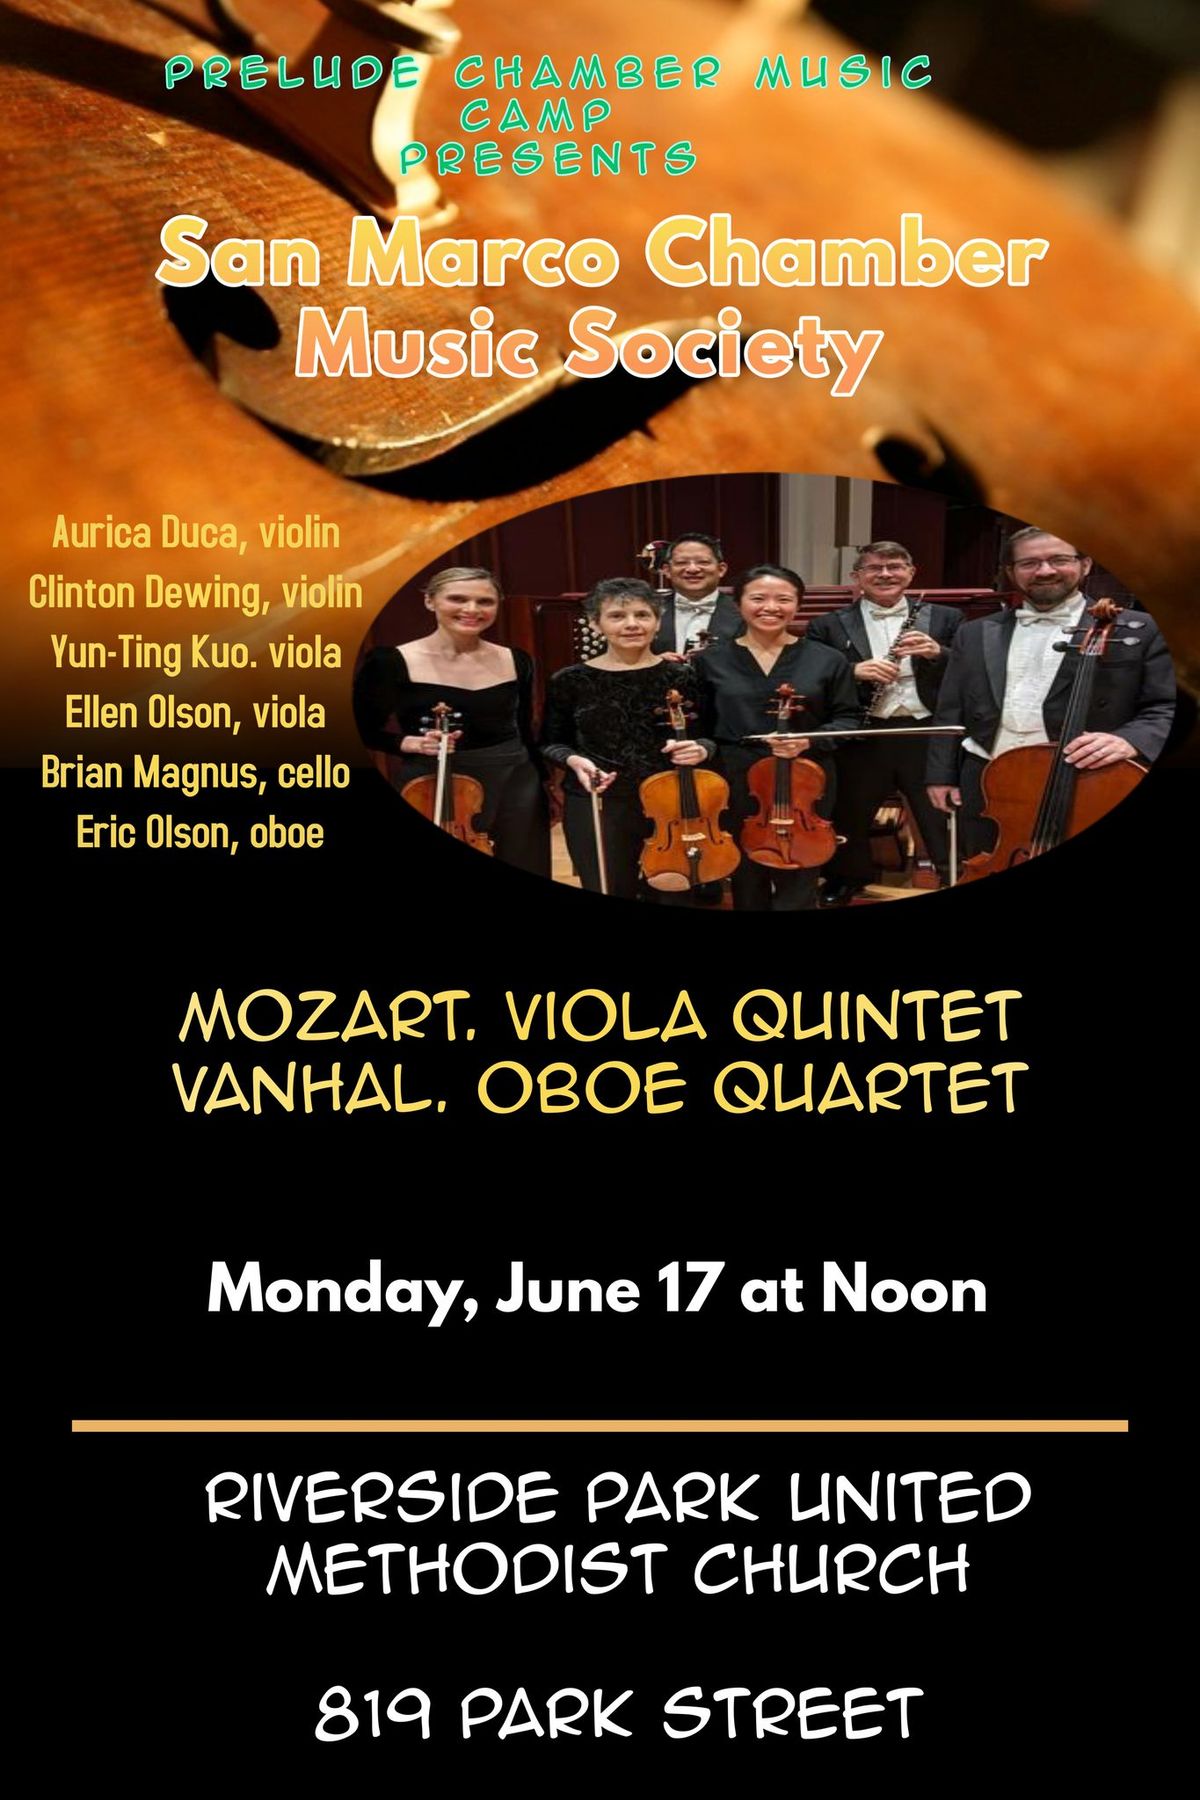 Prelude Noon Concert Series: The San Marco Chamber Music Society